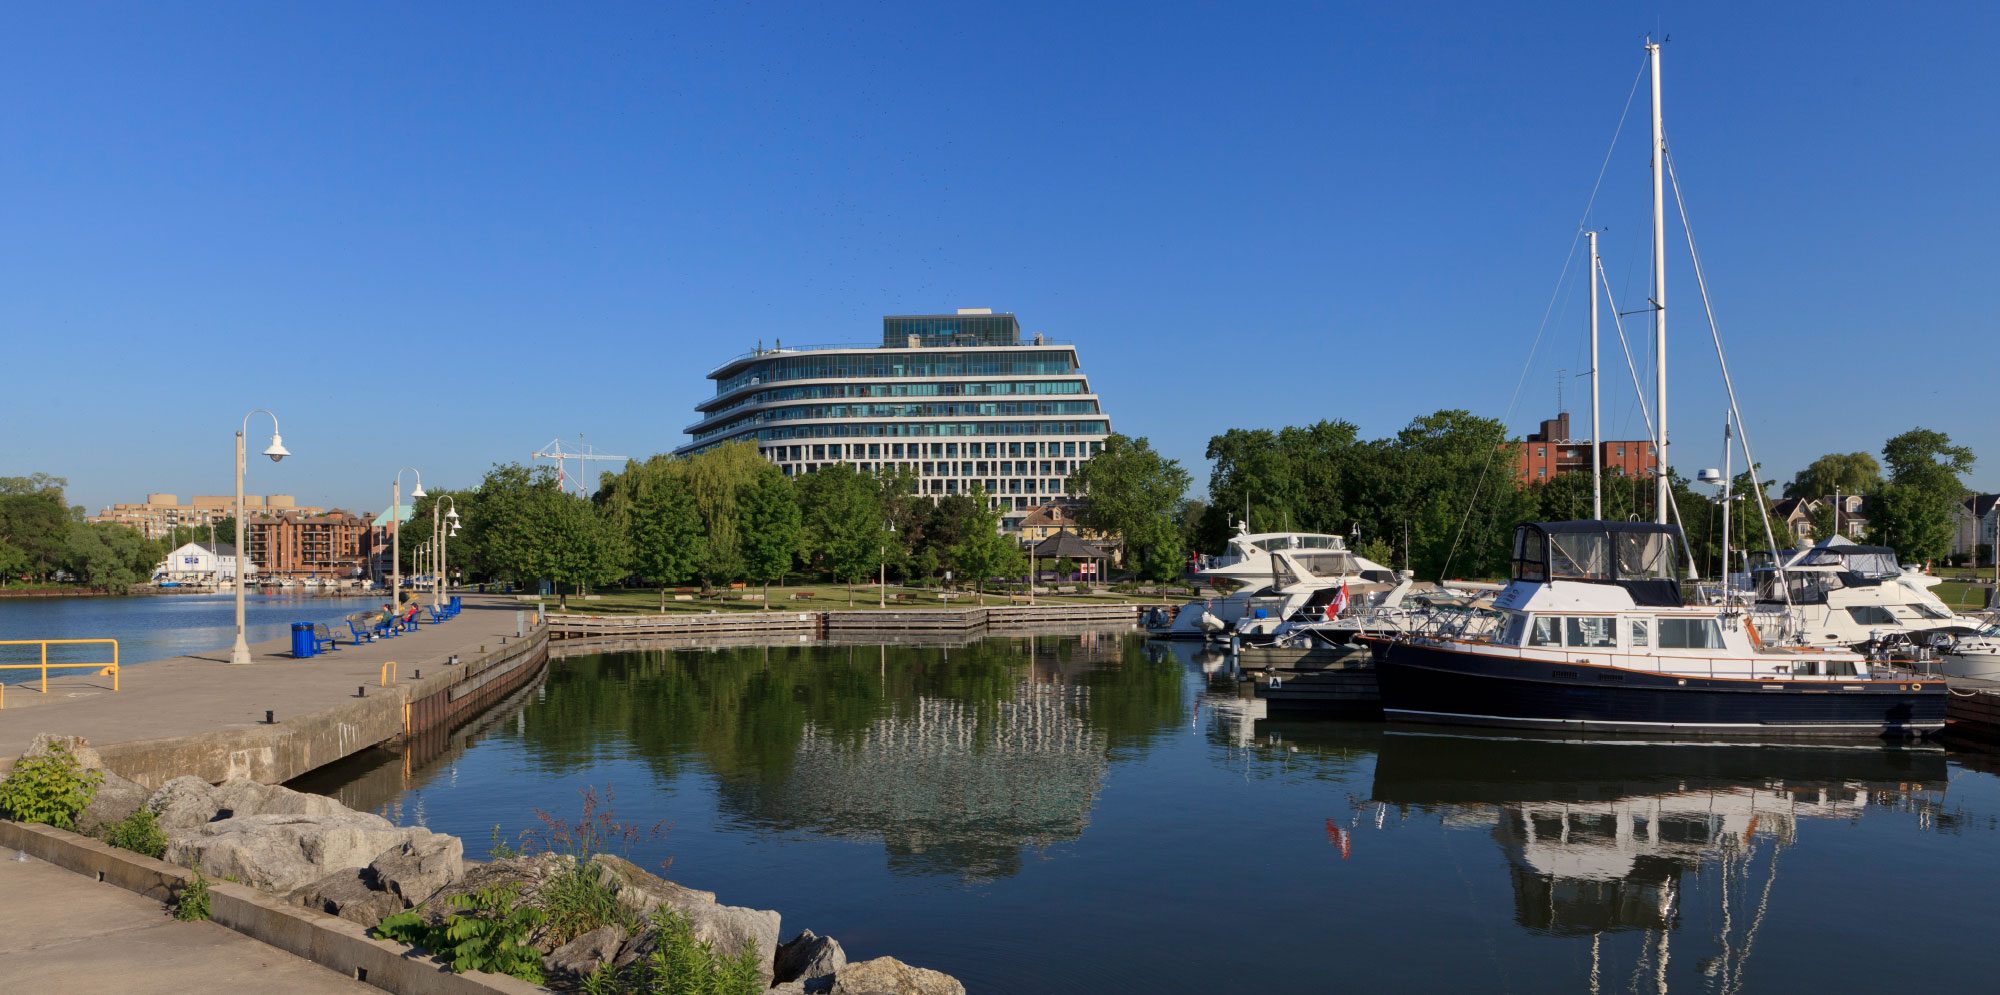 The Shores waterfront building exterior